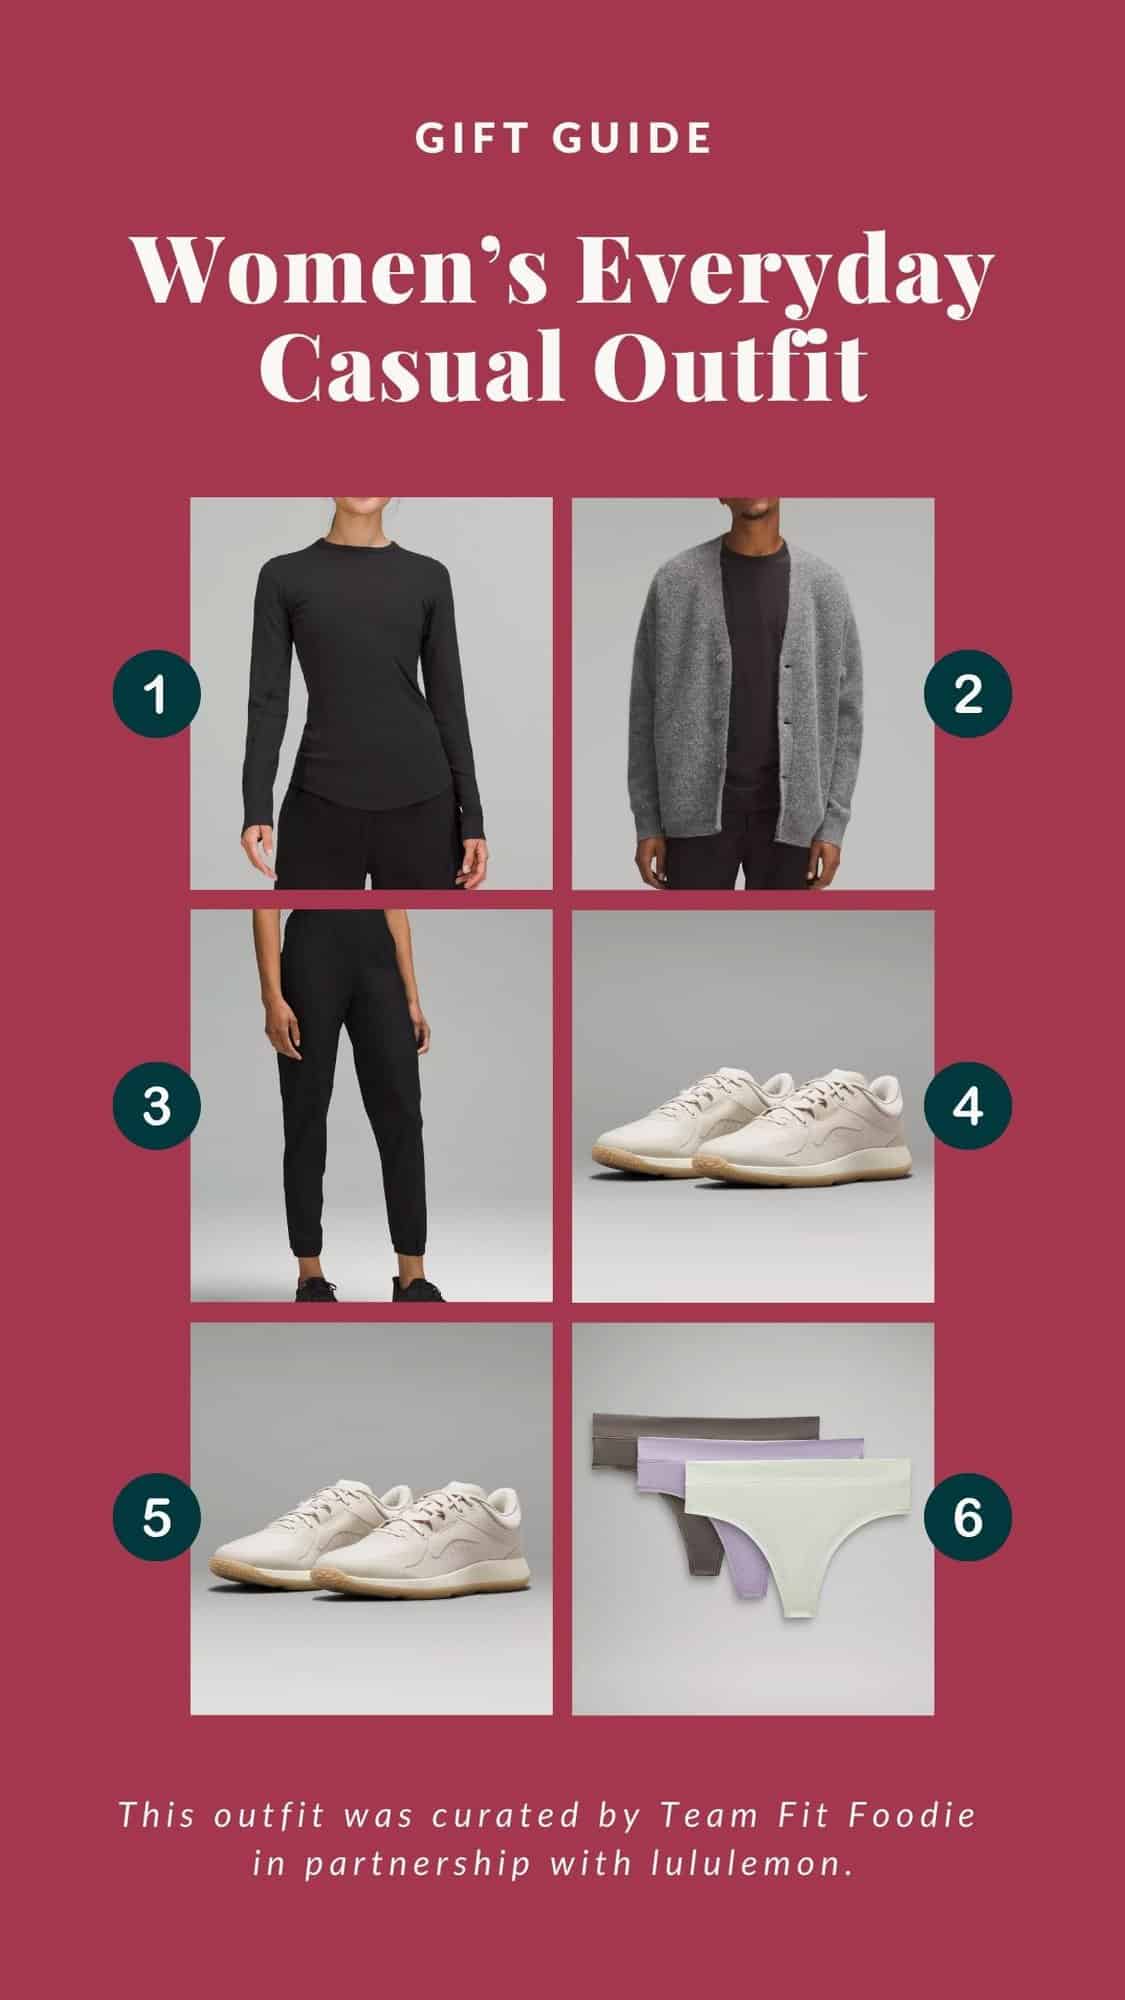 Women's everyday casual outfit gift guide.